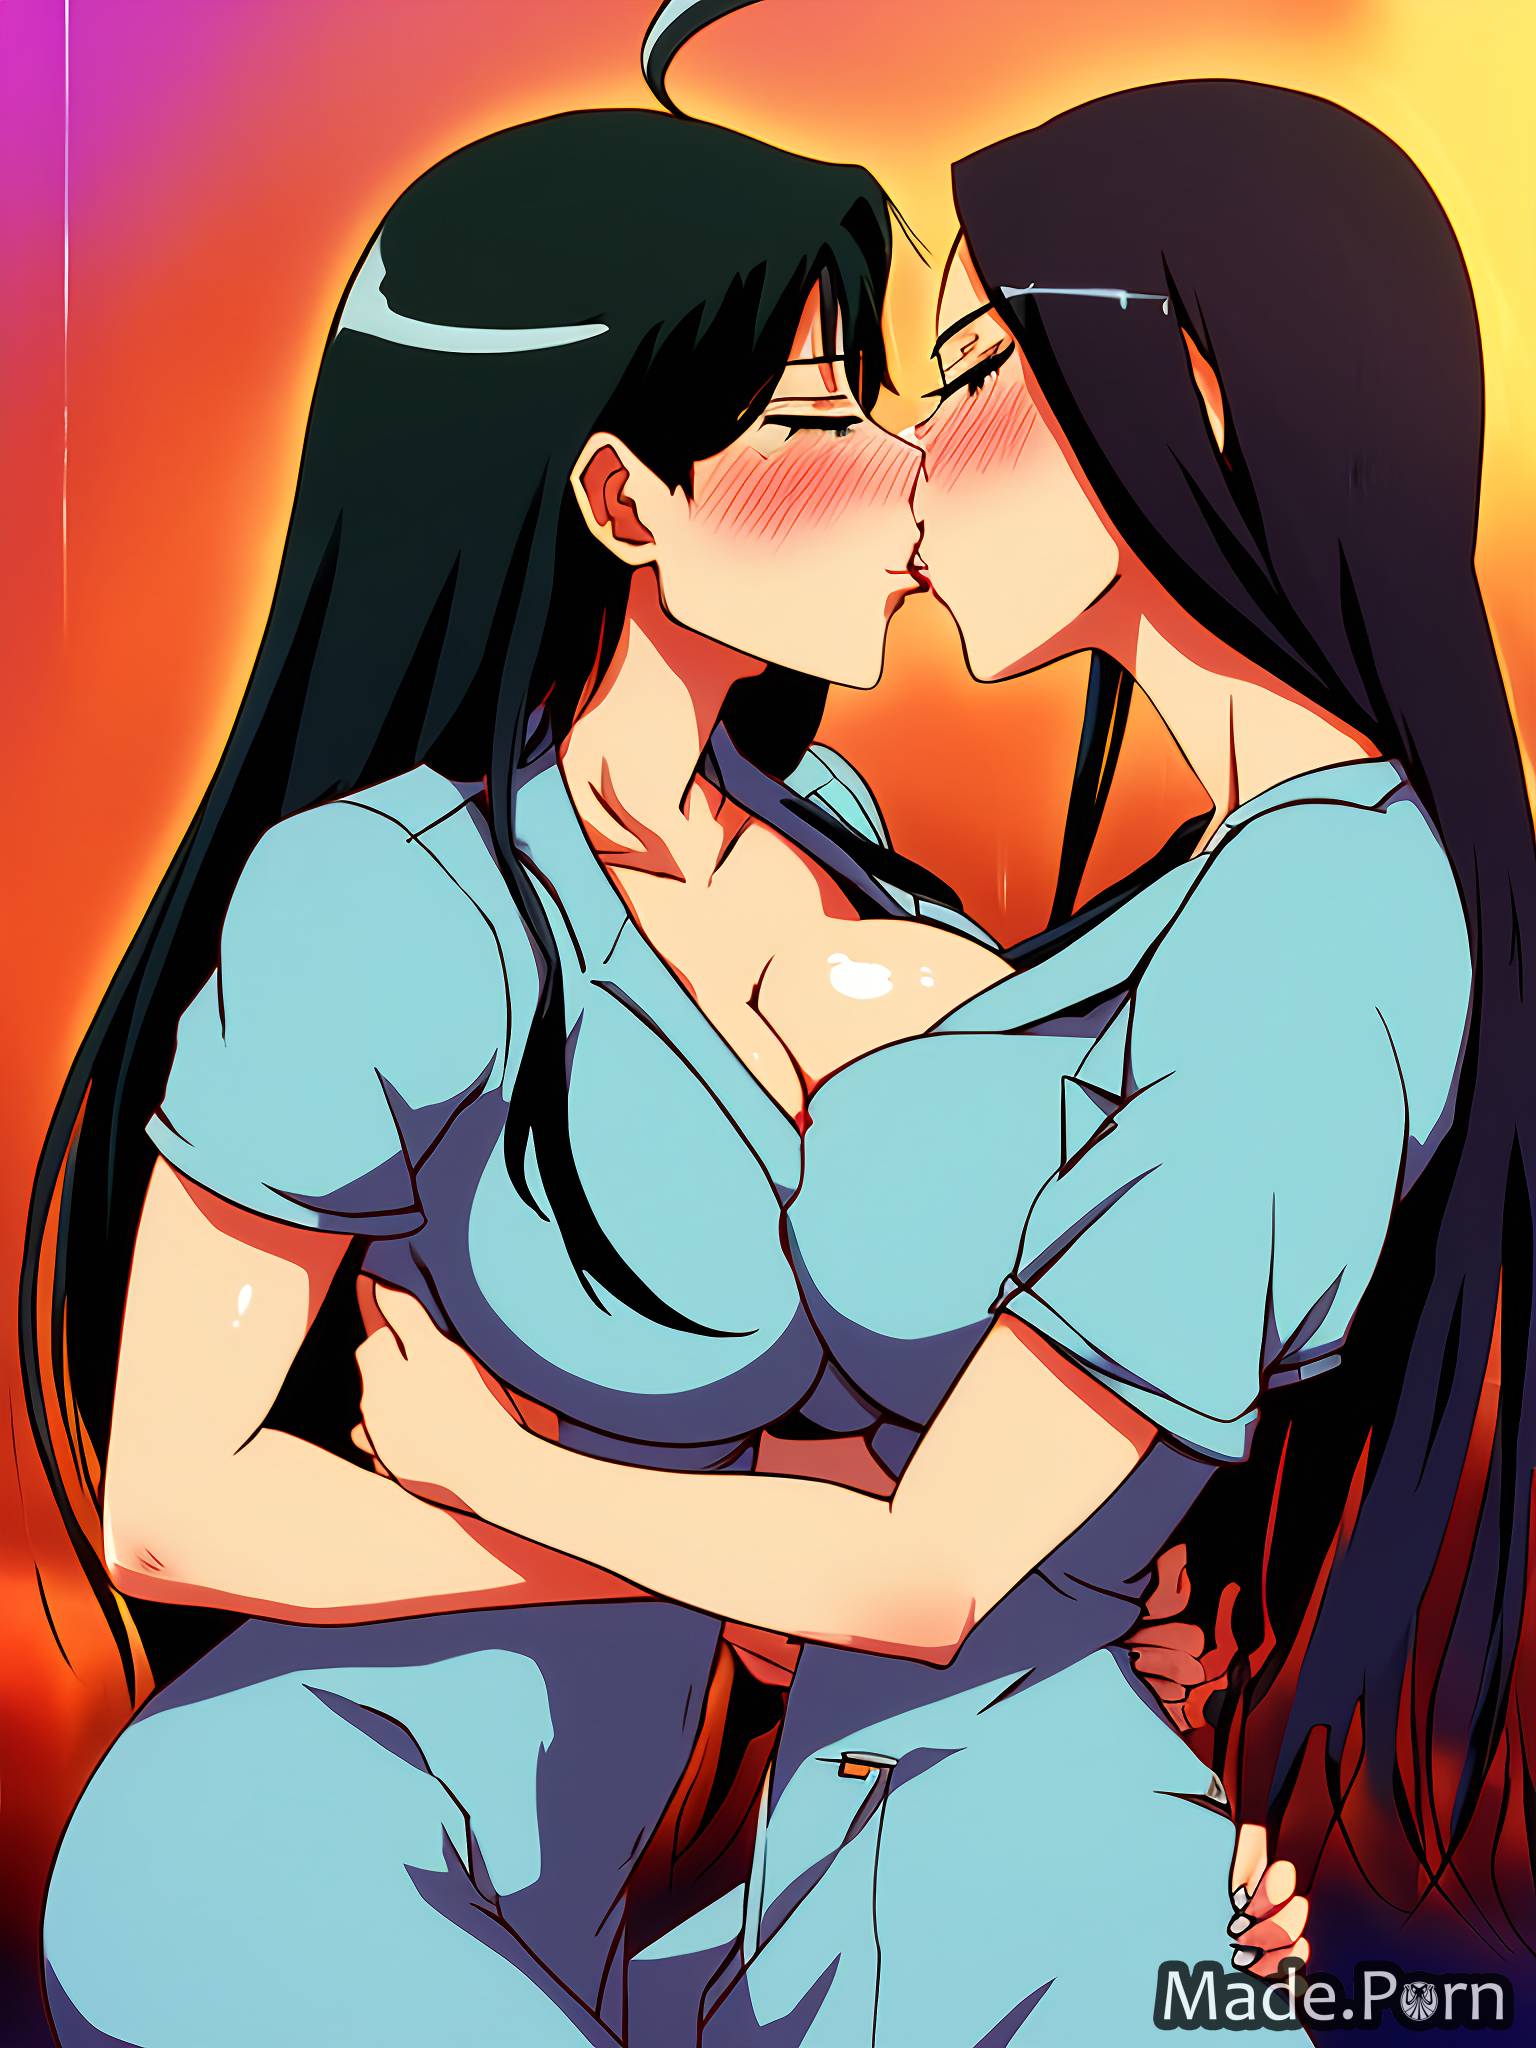 Anime Lesbian Porn Black - Porn image of kissing 20 fully clothed black hair doctor Anime huge boobs  lesbian created by AI